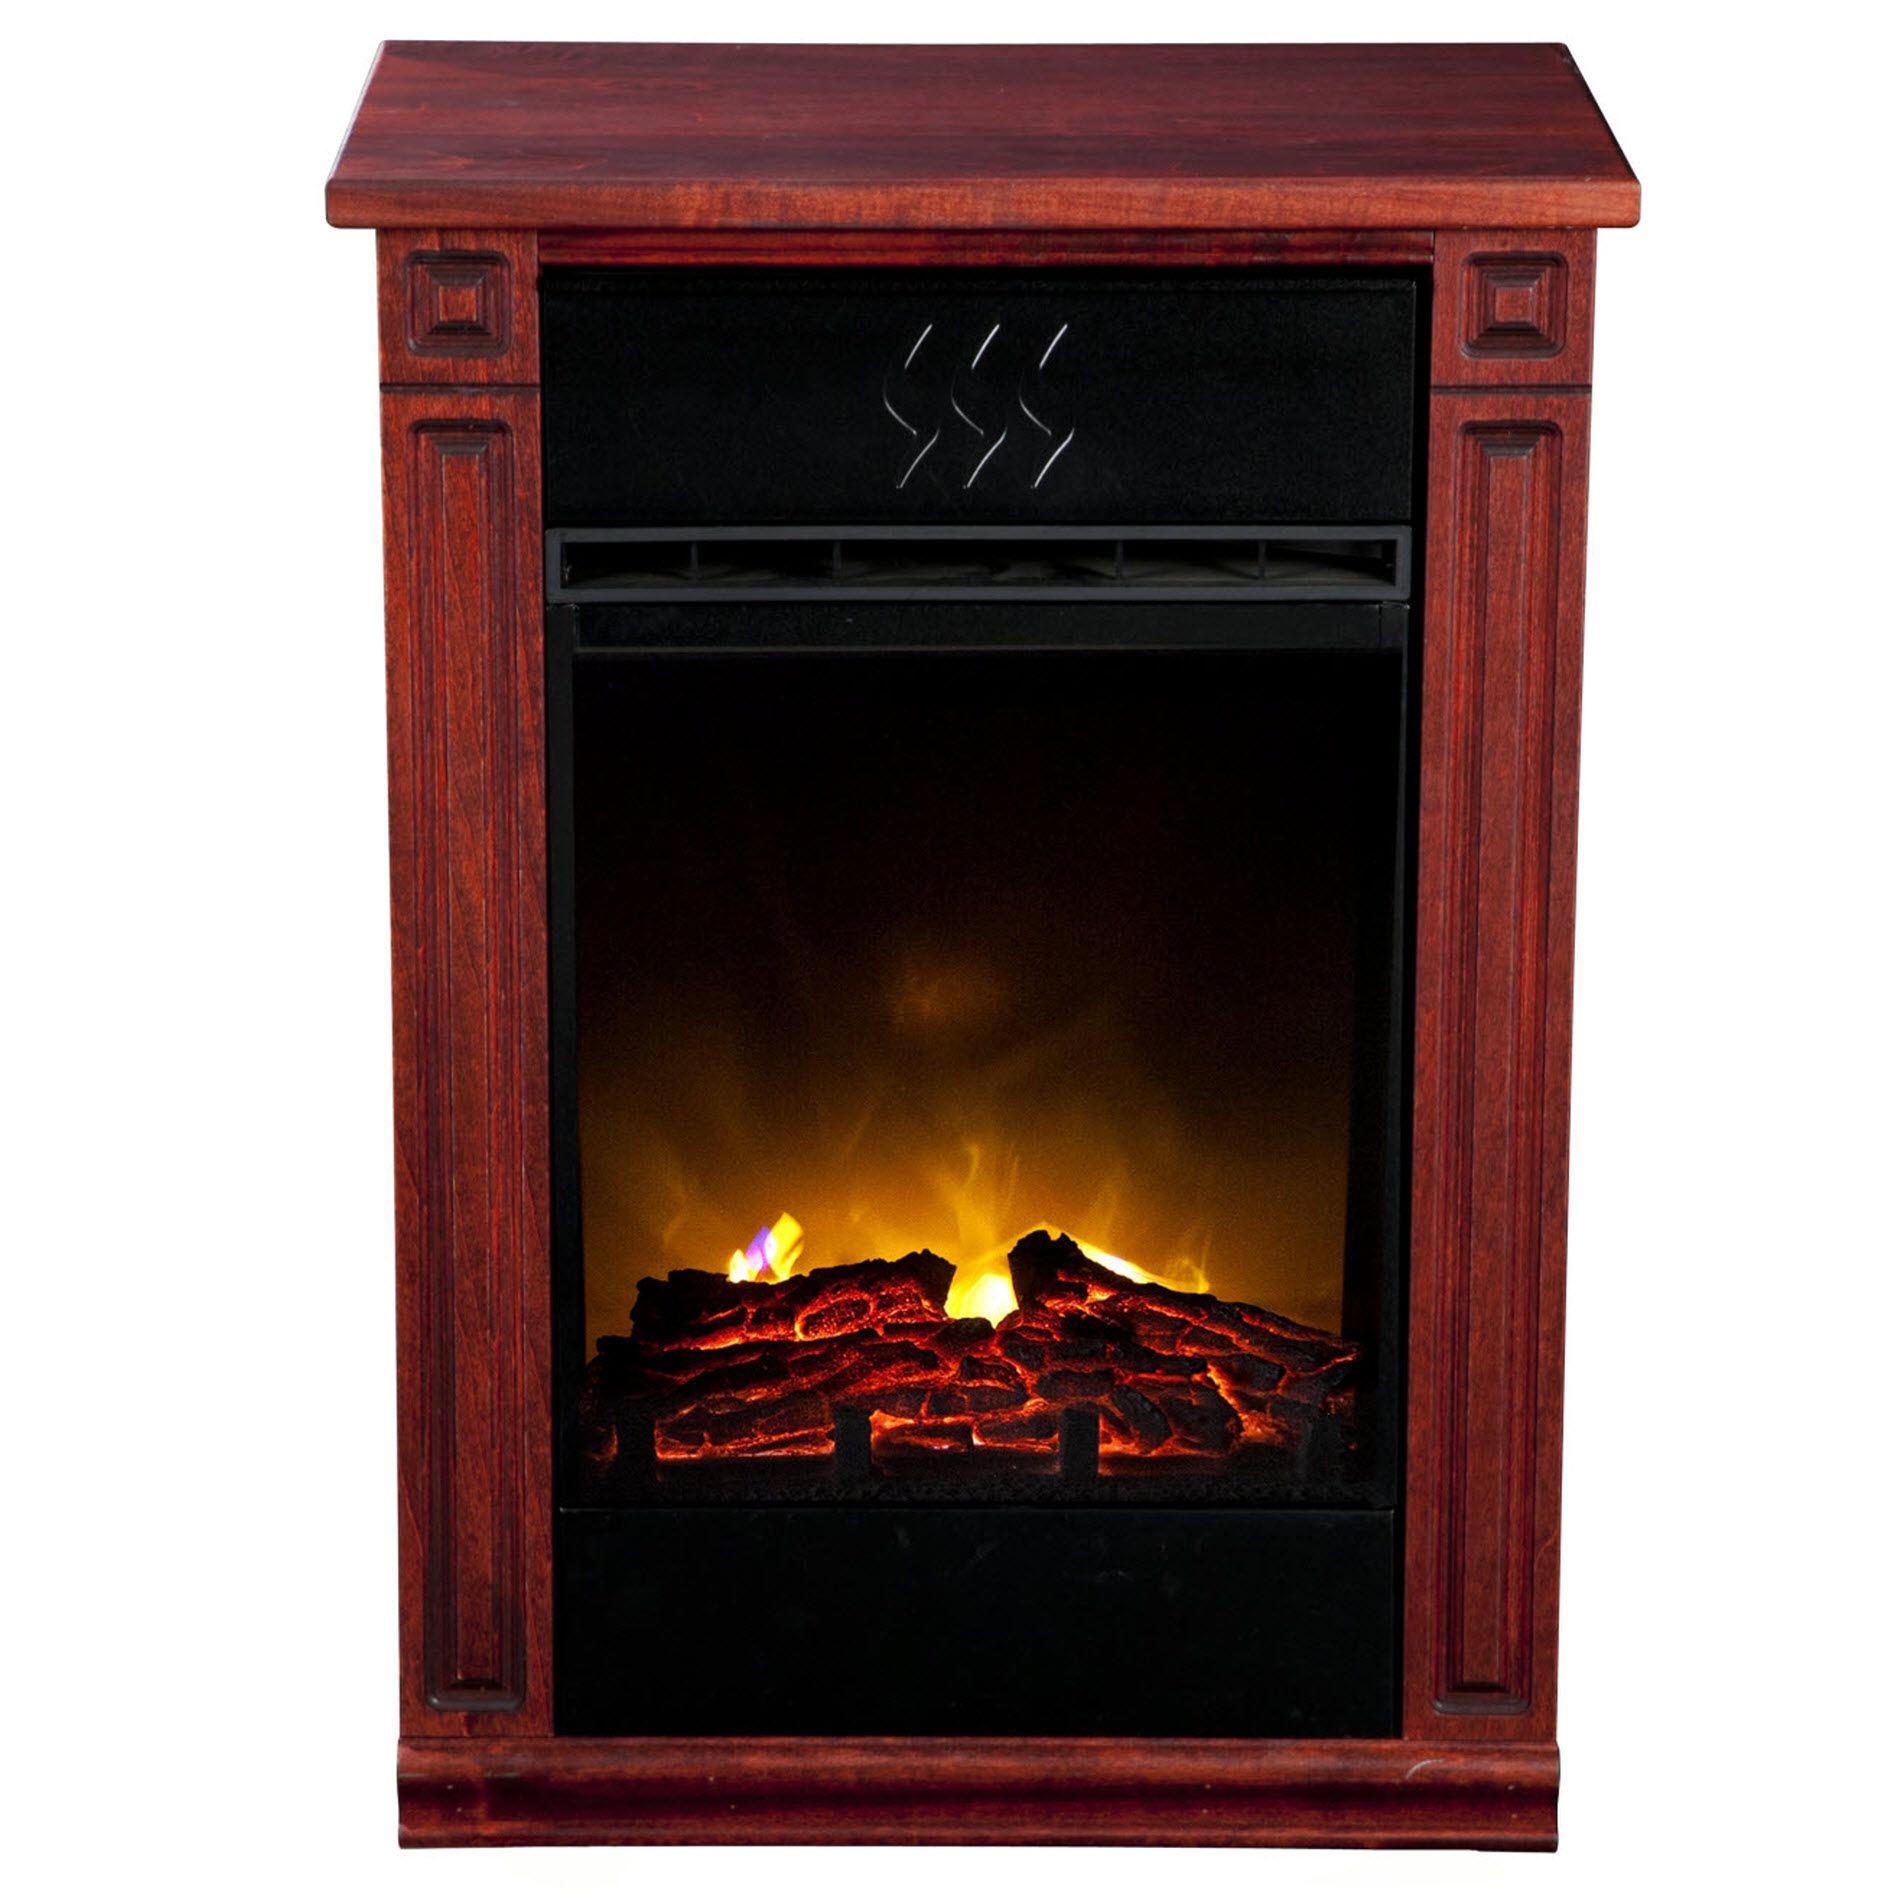 Shop for a Heat Surge Accent Electric Fireplace - Cherry (30000529) at Sears Outlet today! We offer low prices and great service.